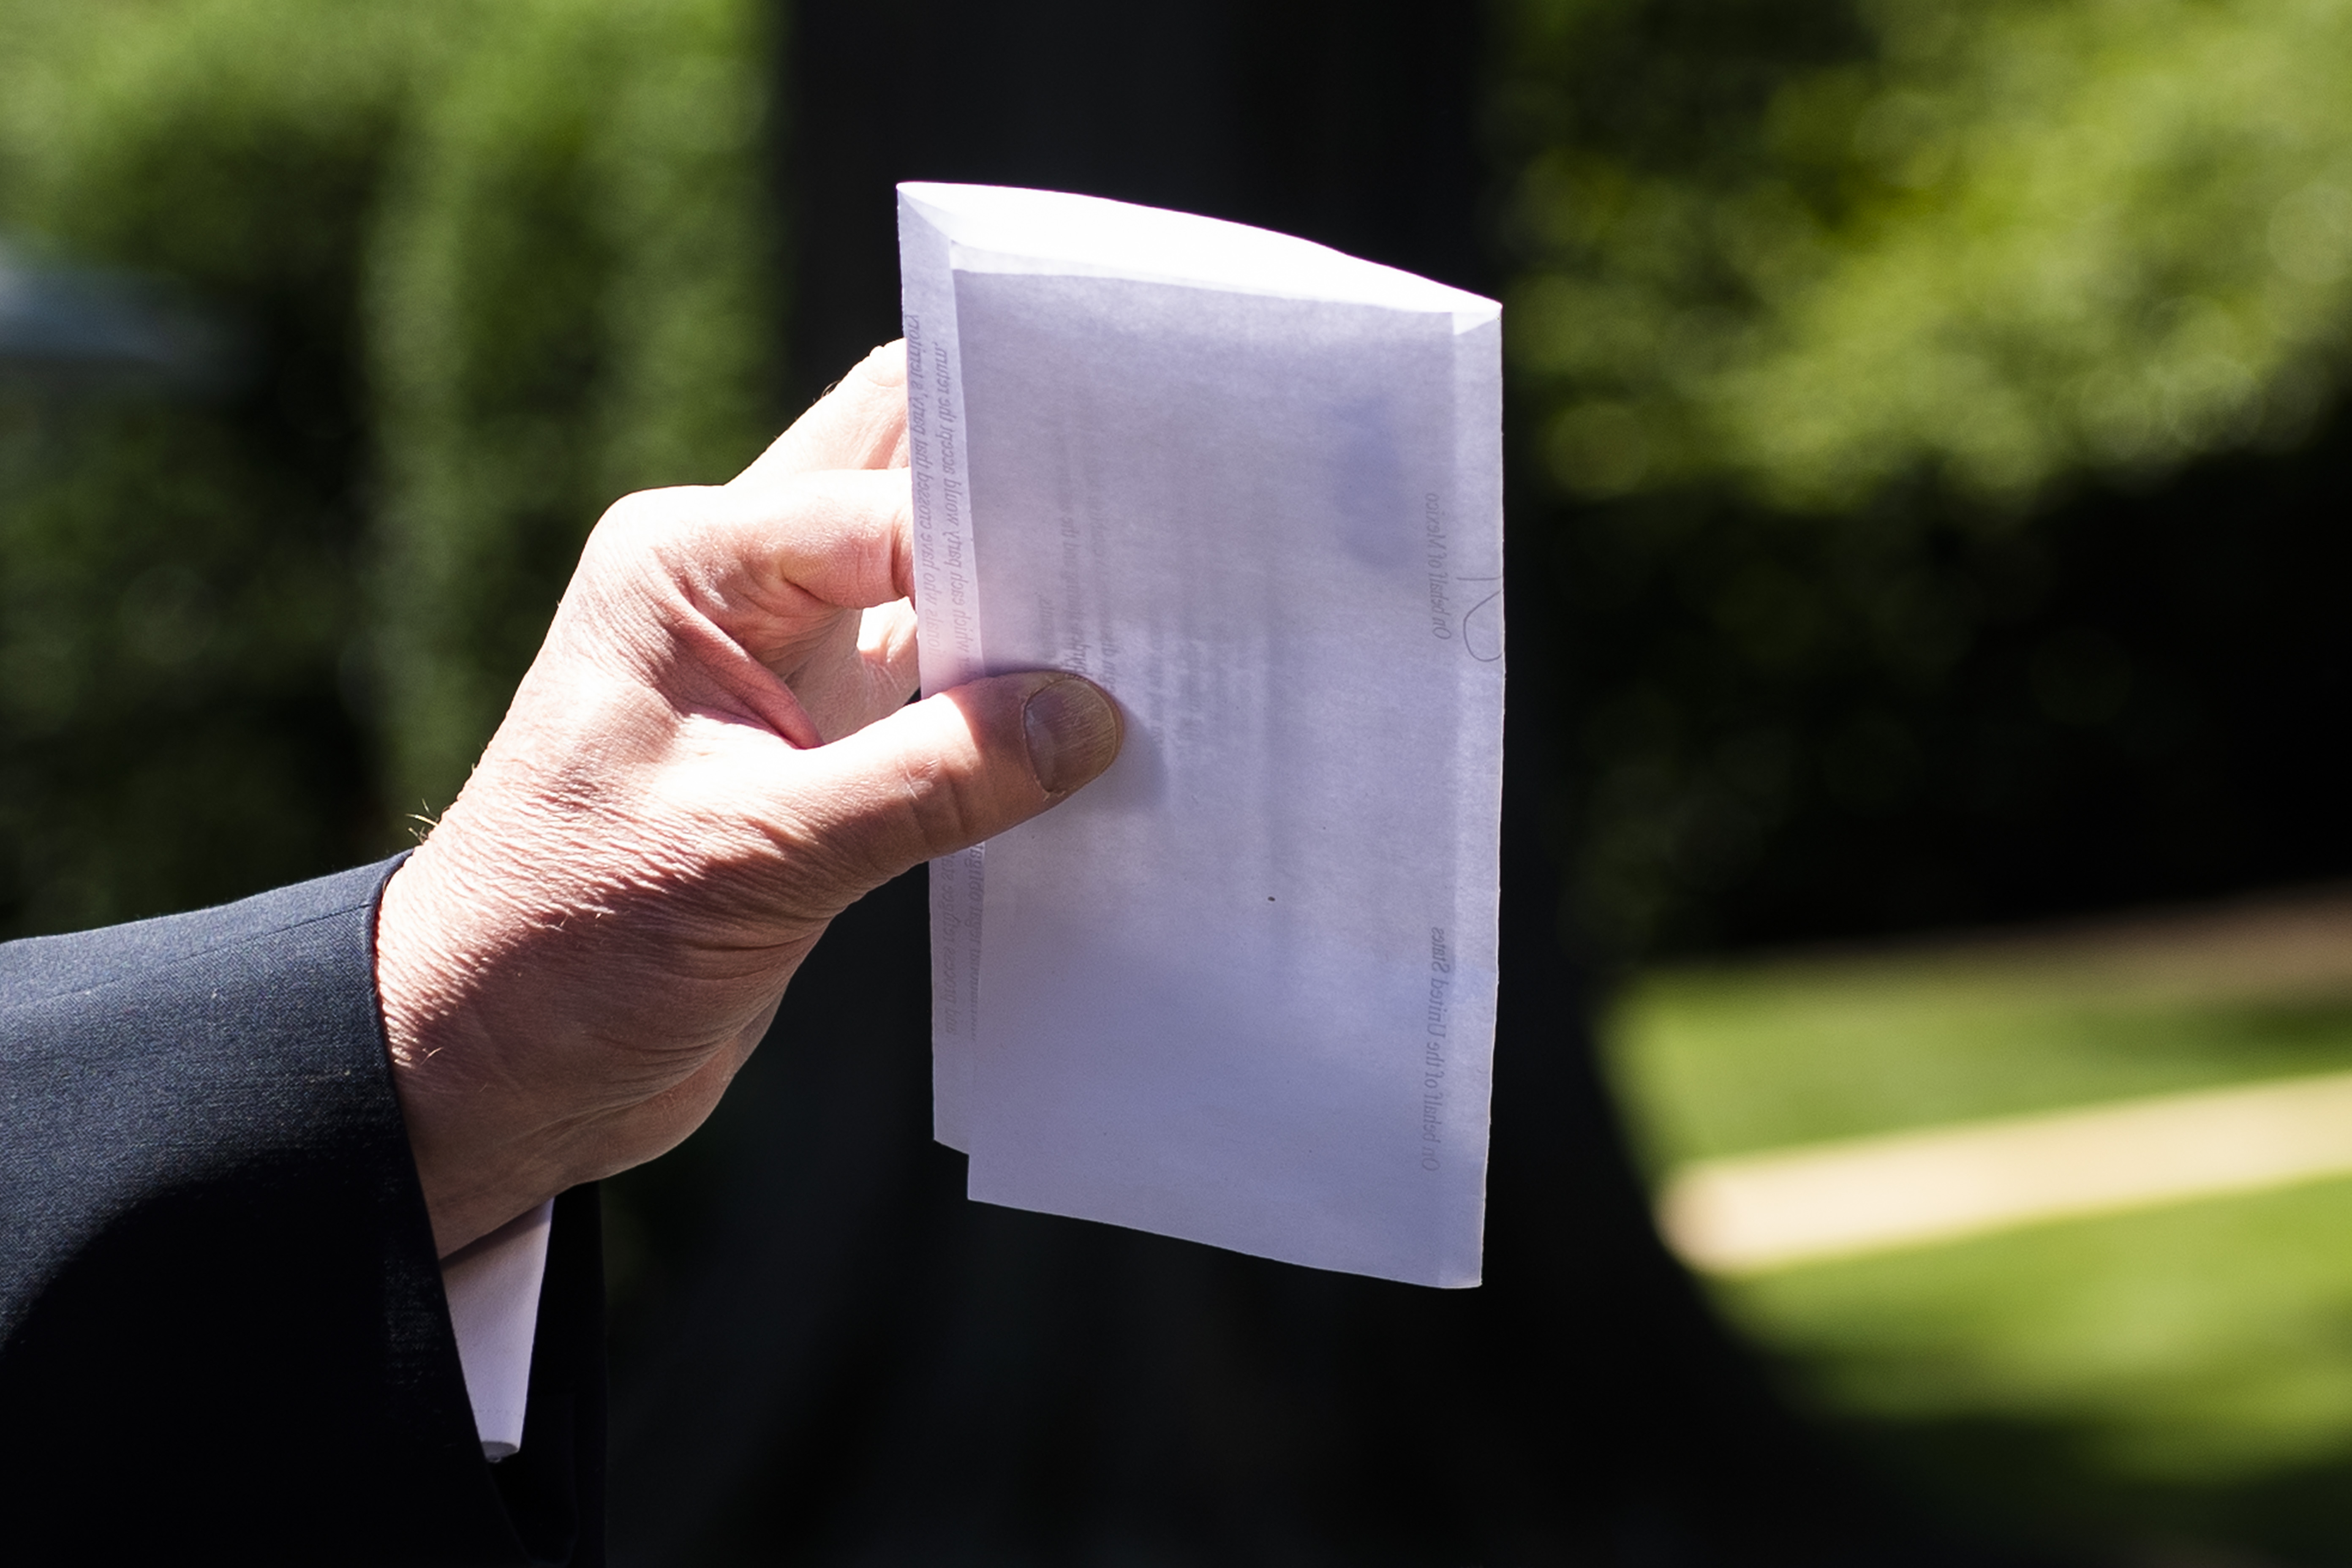 US President Donald Trump holds piece of paper saying its his deal with Mexico as he speaks with reporters at the White House, in Washington, DC, on June 11, 2019. - Trump did not show the paper to reporters. (Photo by Jim WATSON / AFP) (Photo credit should read JIM WATSON/AFP/Getty Images)